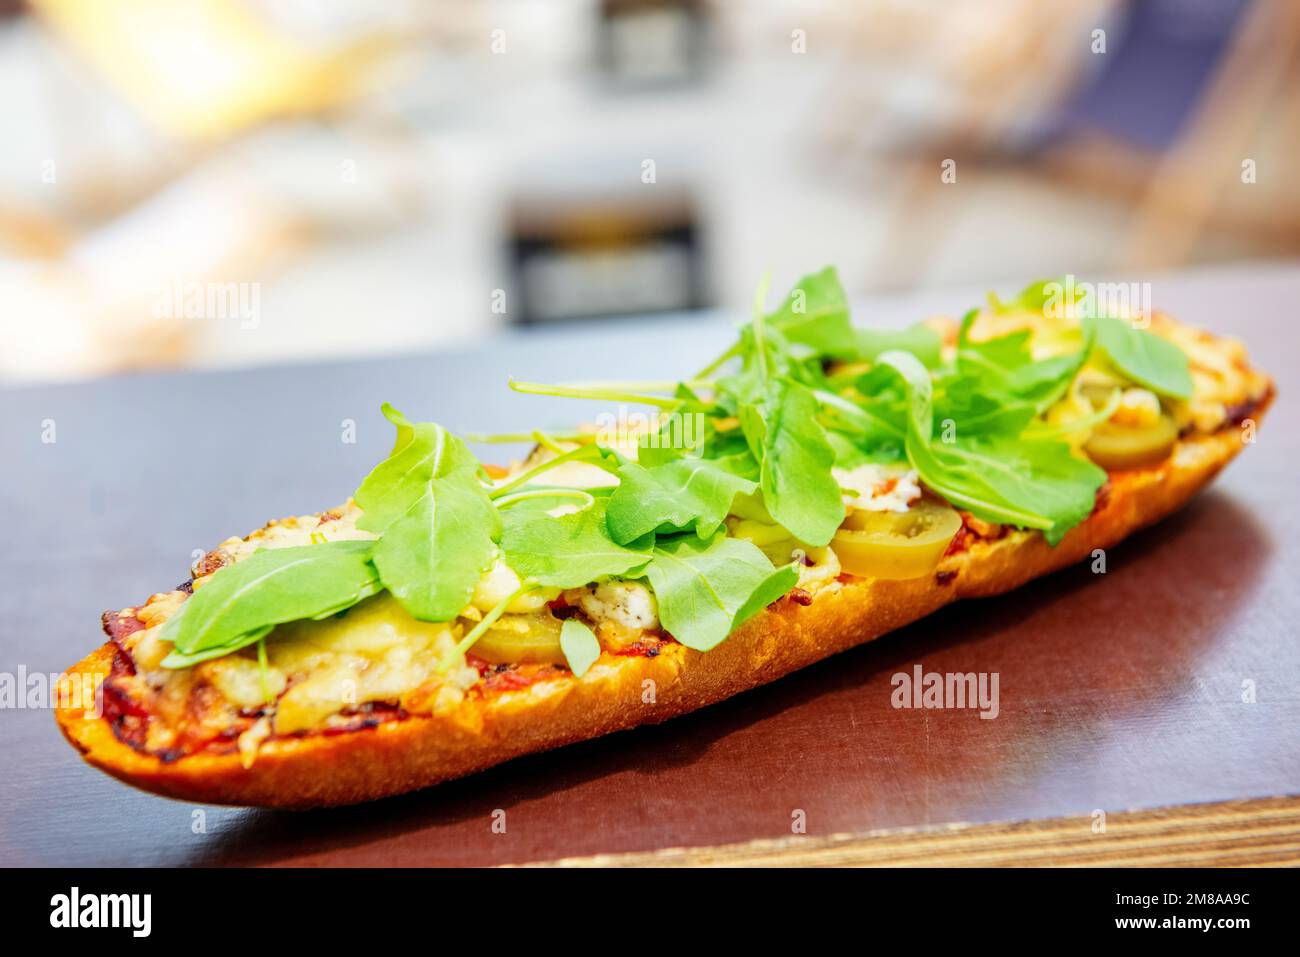 baguette with tomato sauce, meat, jalapeno and arugula baked with cheese on a table outdoor. popular street fast food Stock Photo